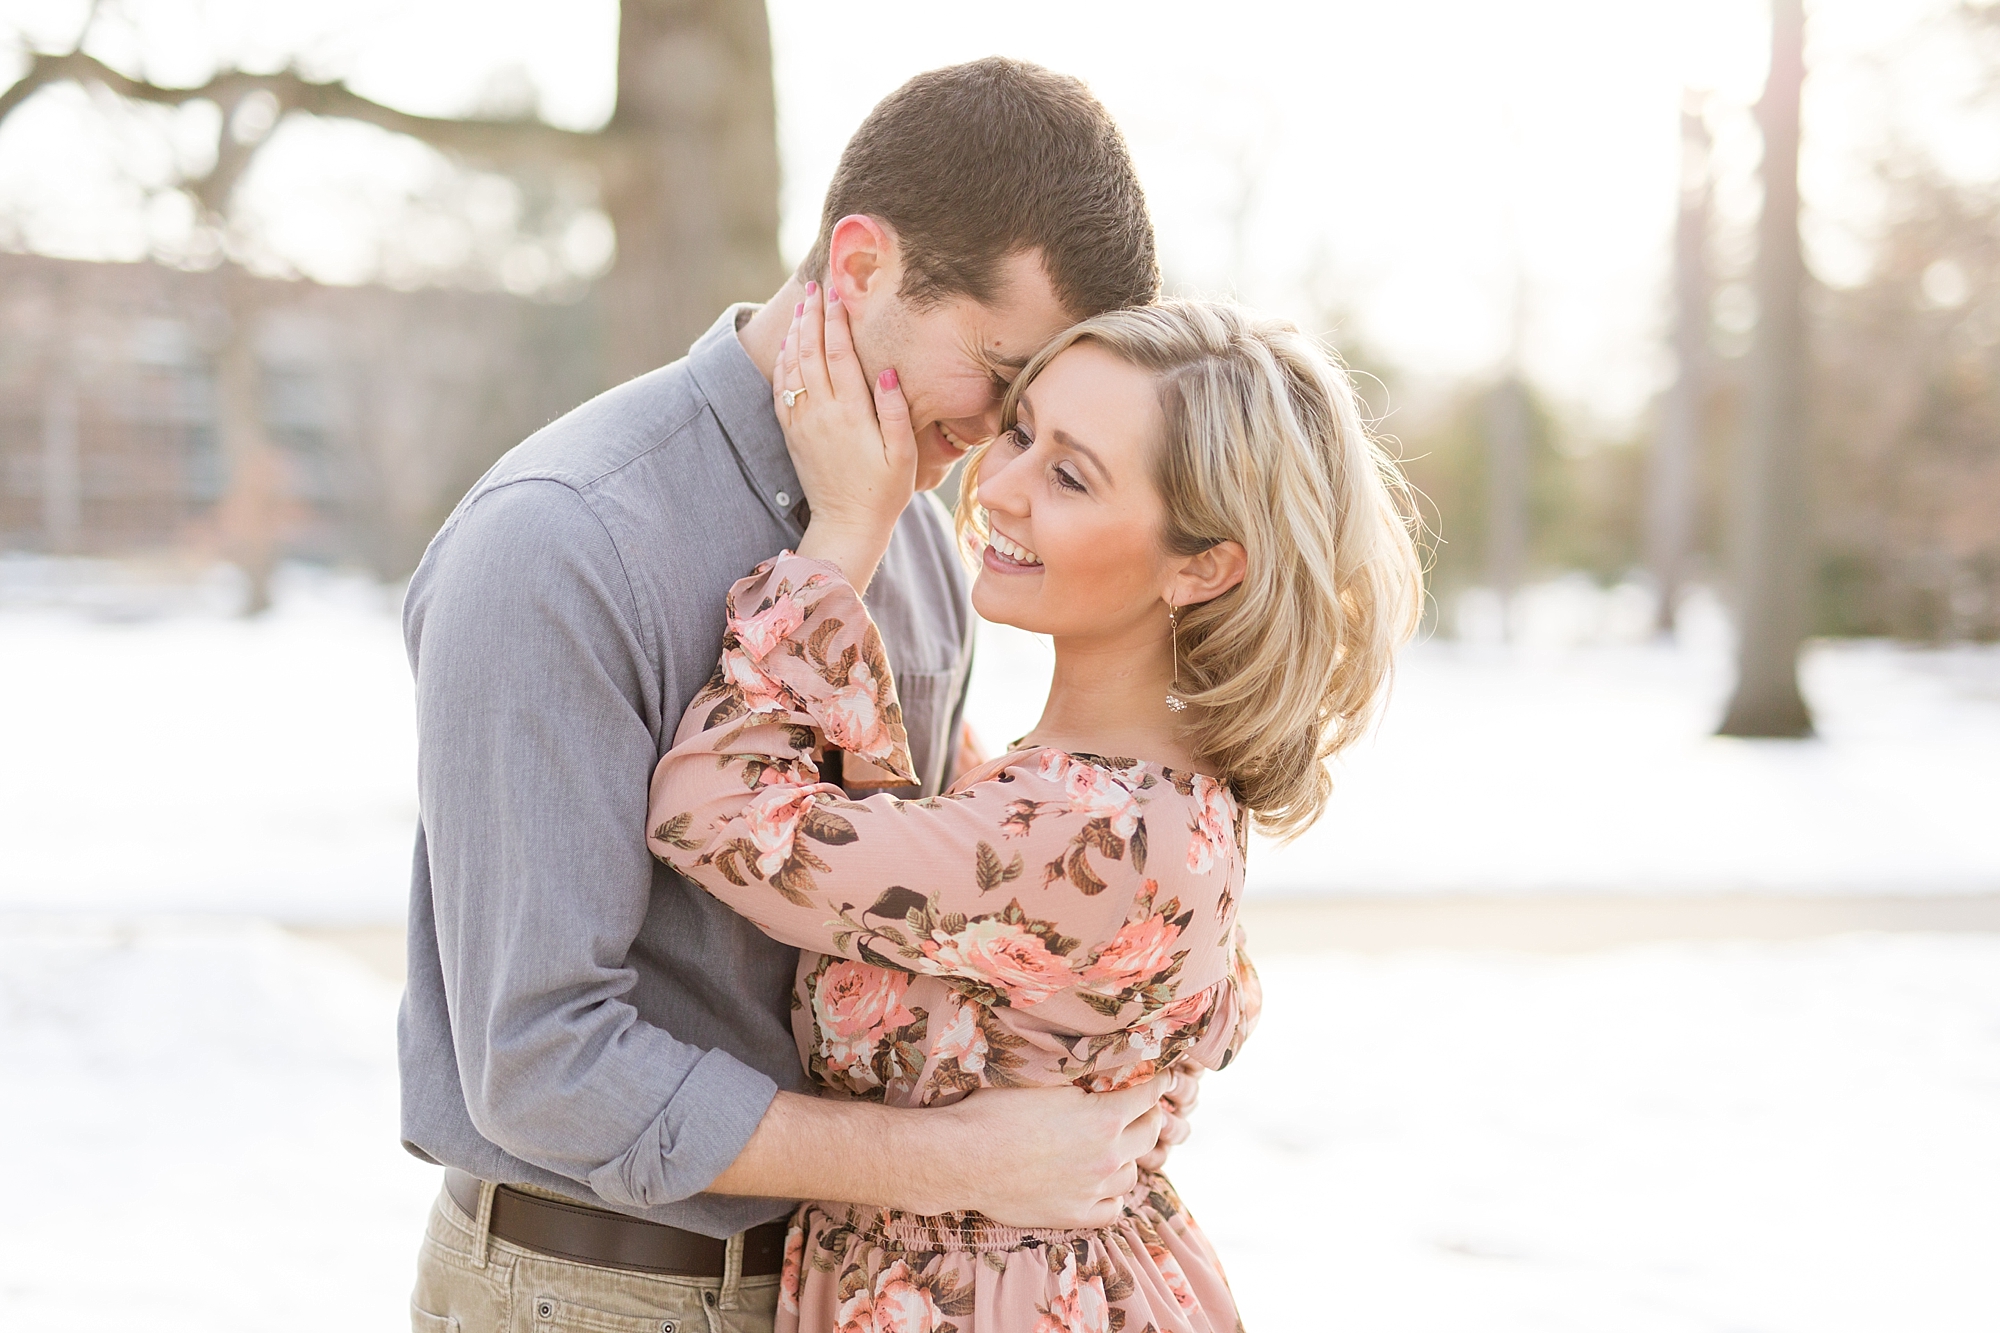 A late February winter engagement at Beaumont Tower and Wells Hall on campus at Michigan State University by Breanne Rochelle Photography.